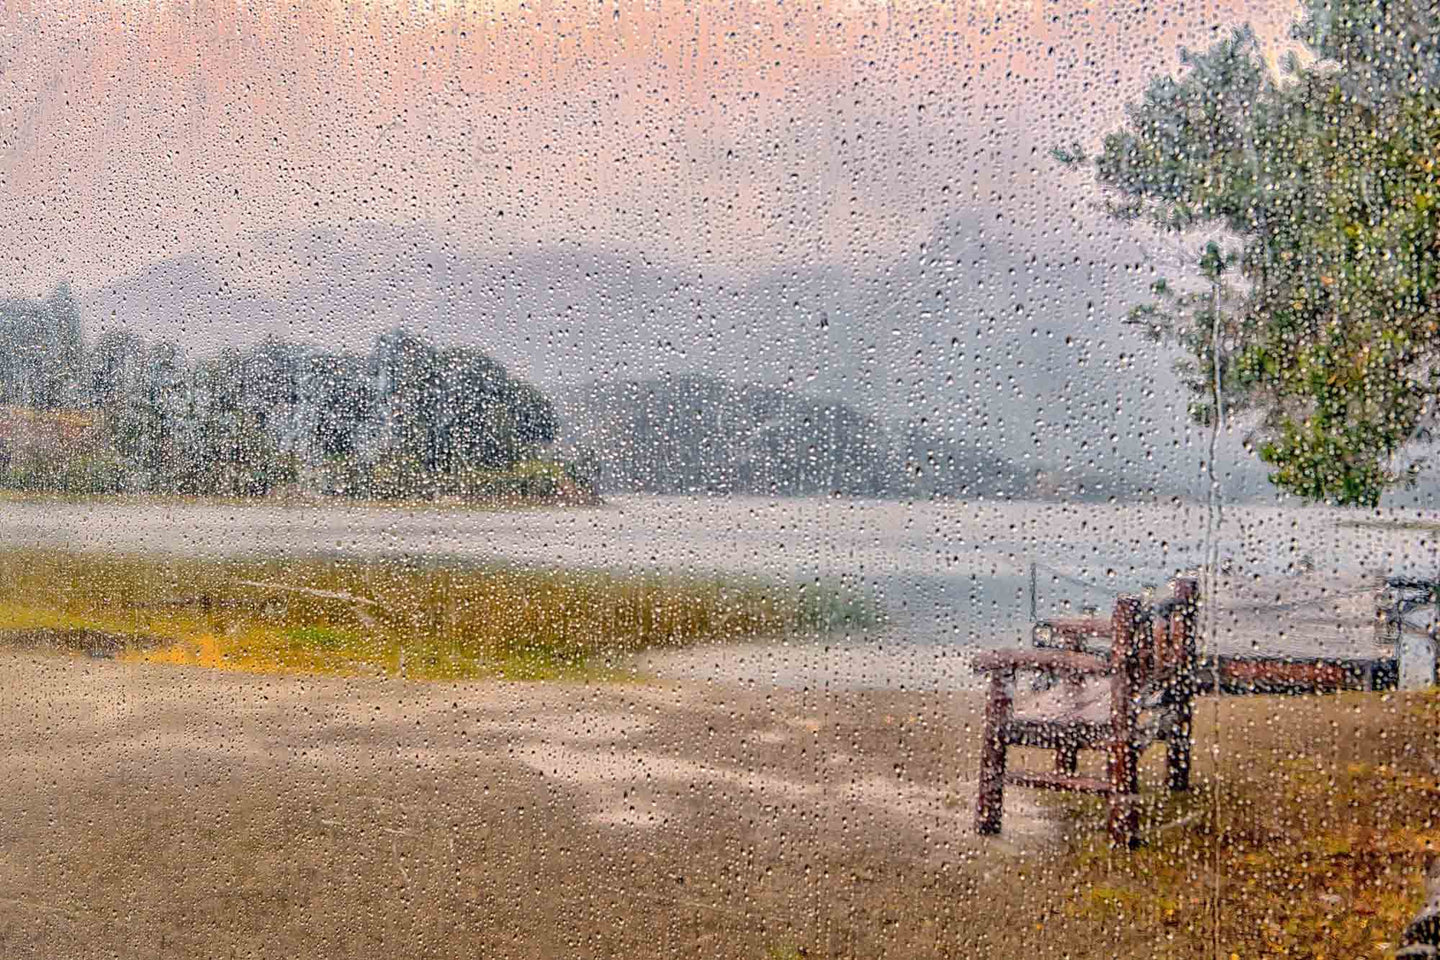 Rainy Day in Chile